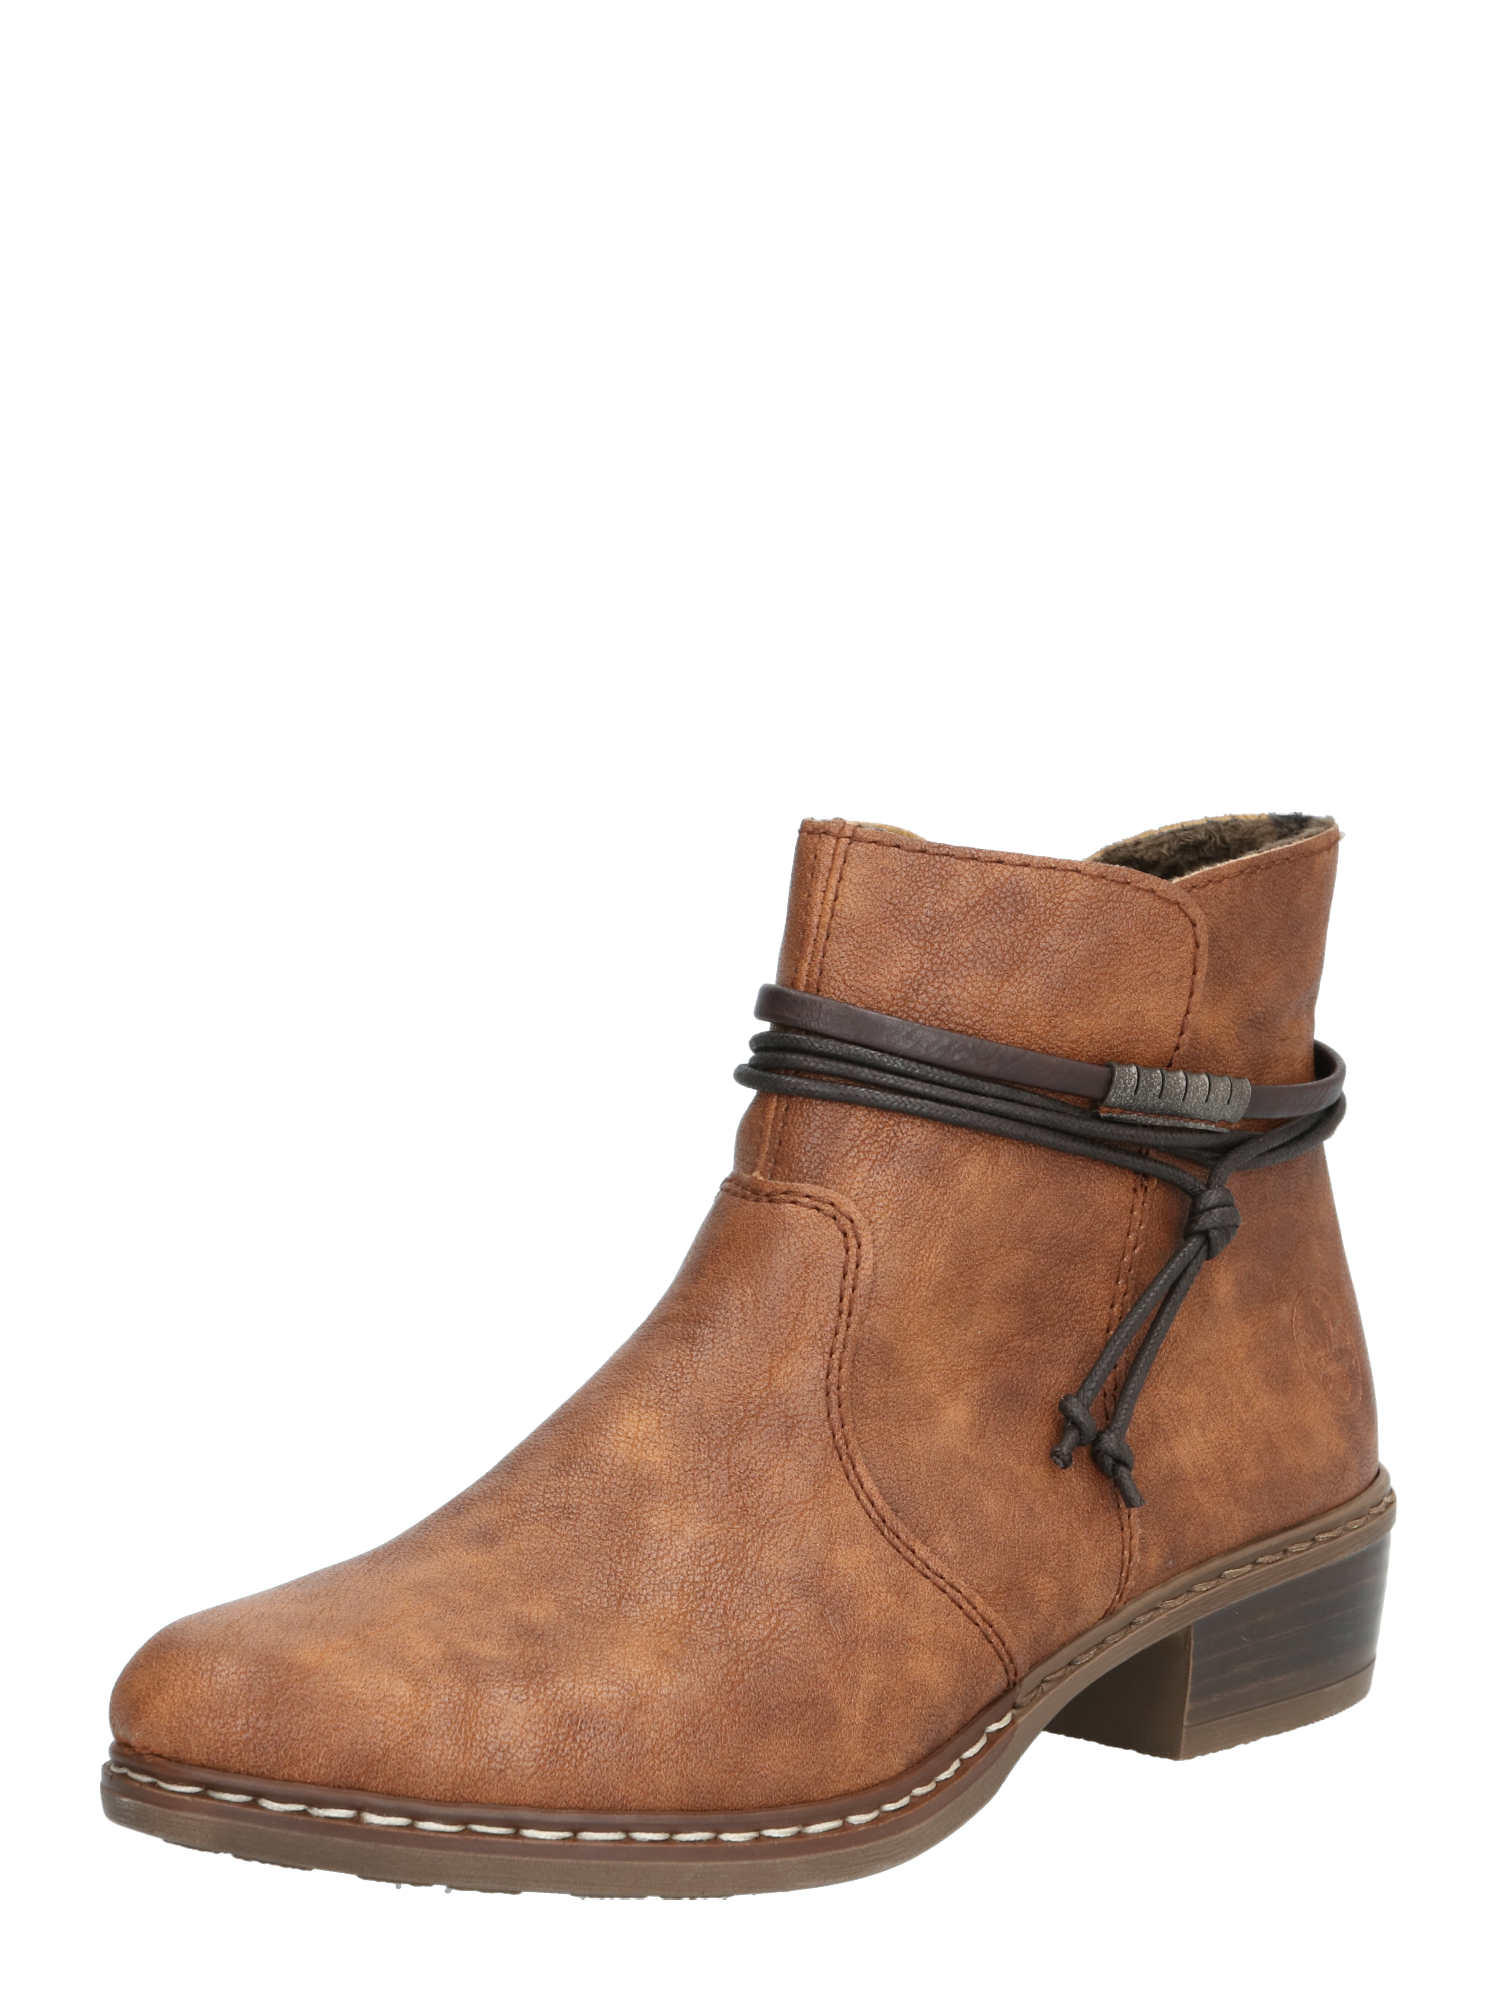 PROMO Donna RIEKER Ankle boots in Marrone 